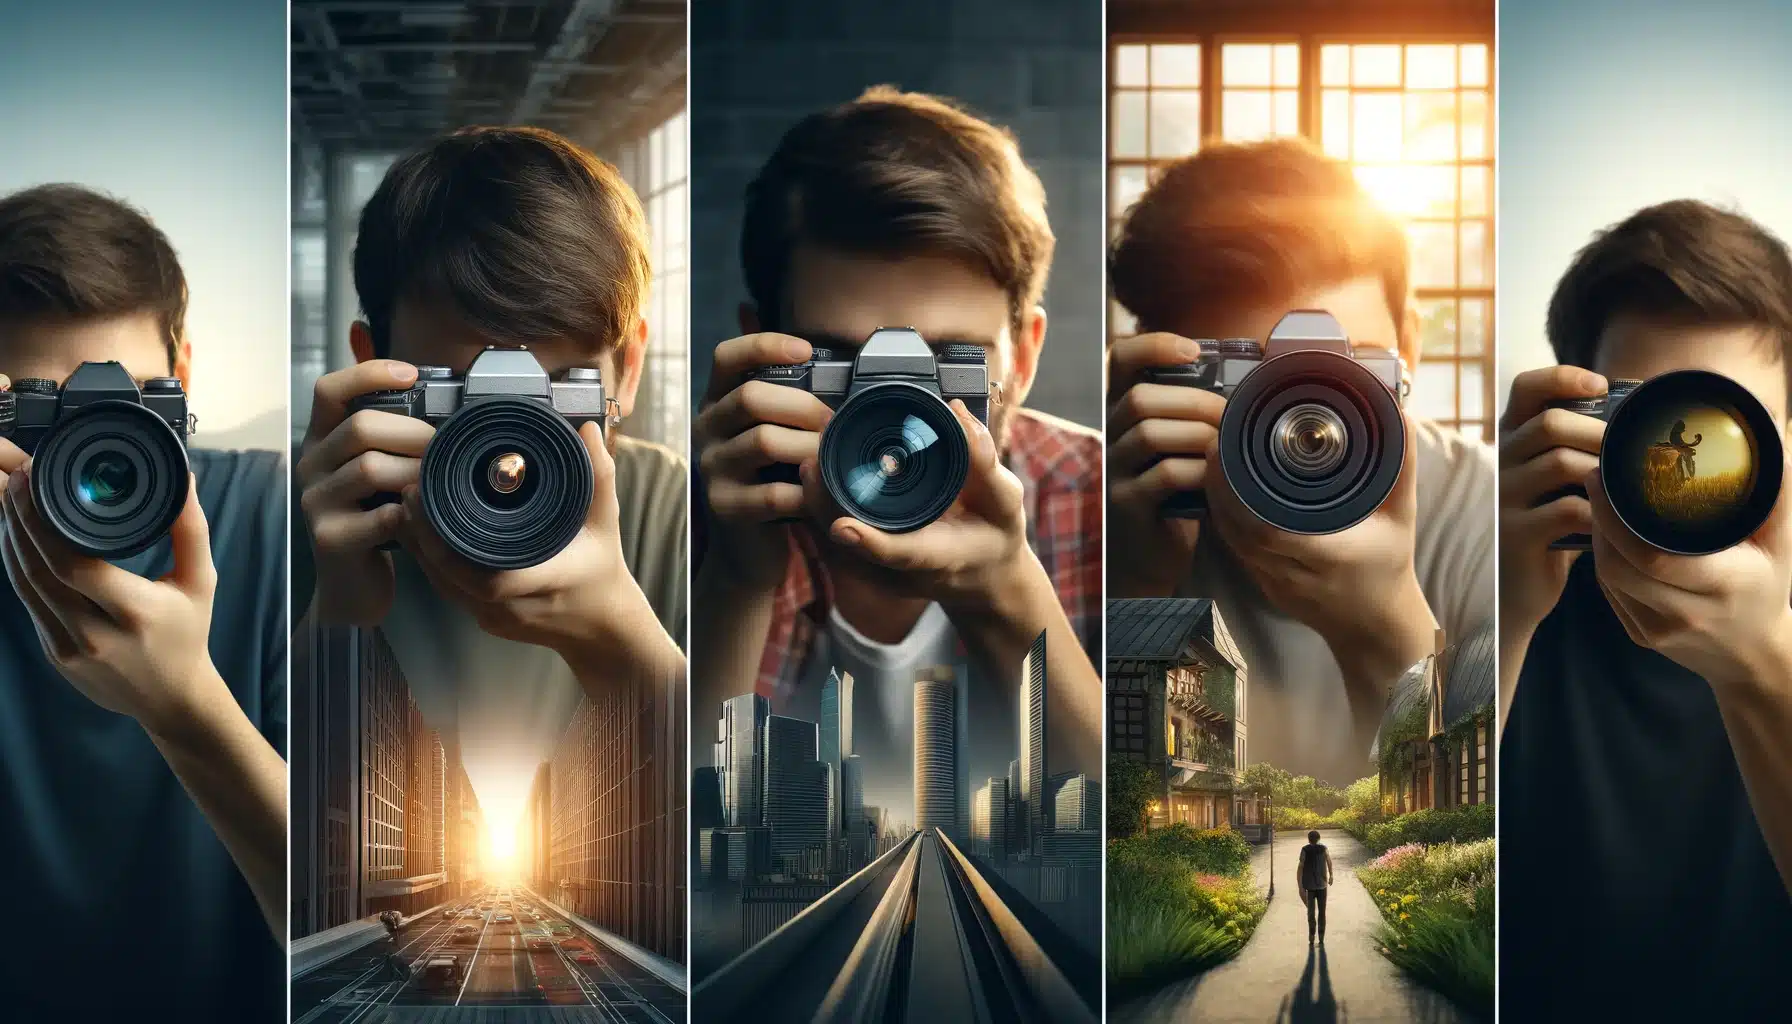 Five people using cameras with tilt-shift lenses in architectural, landscape, and portrait photography settings